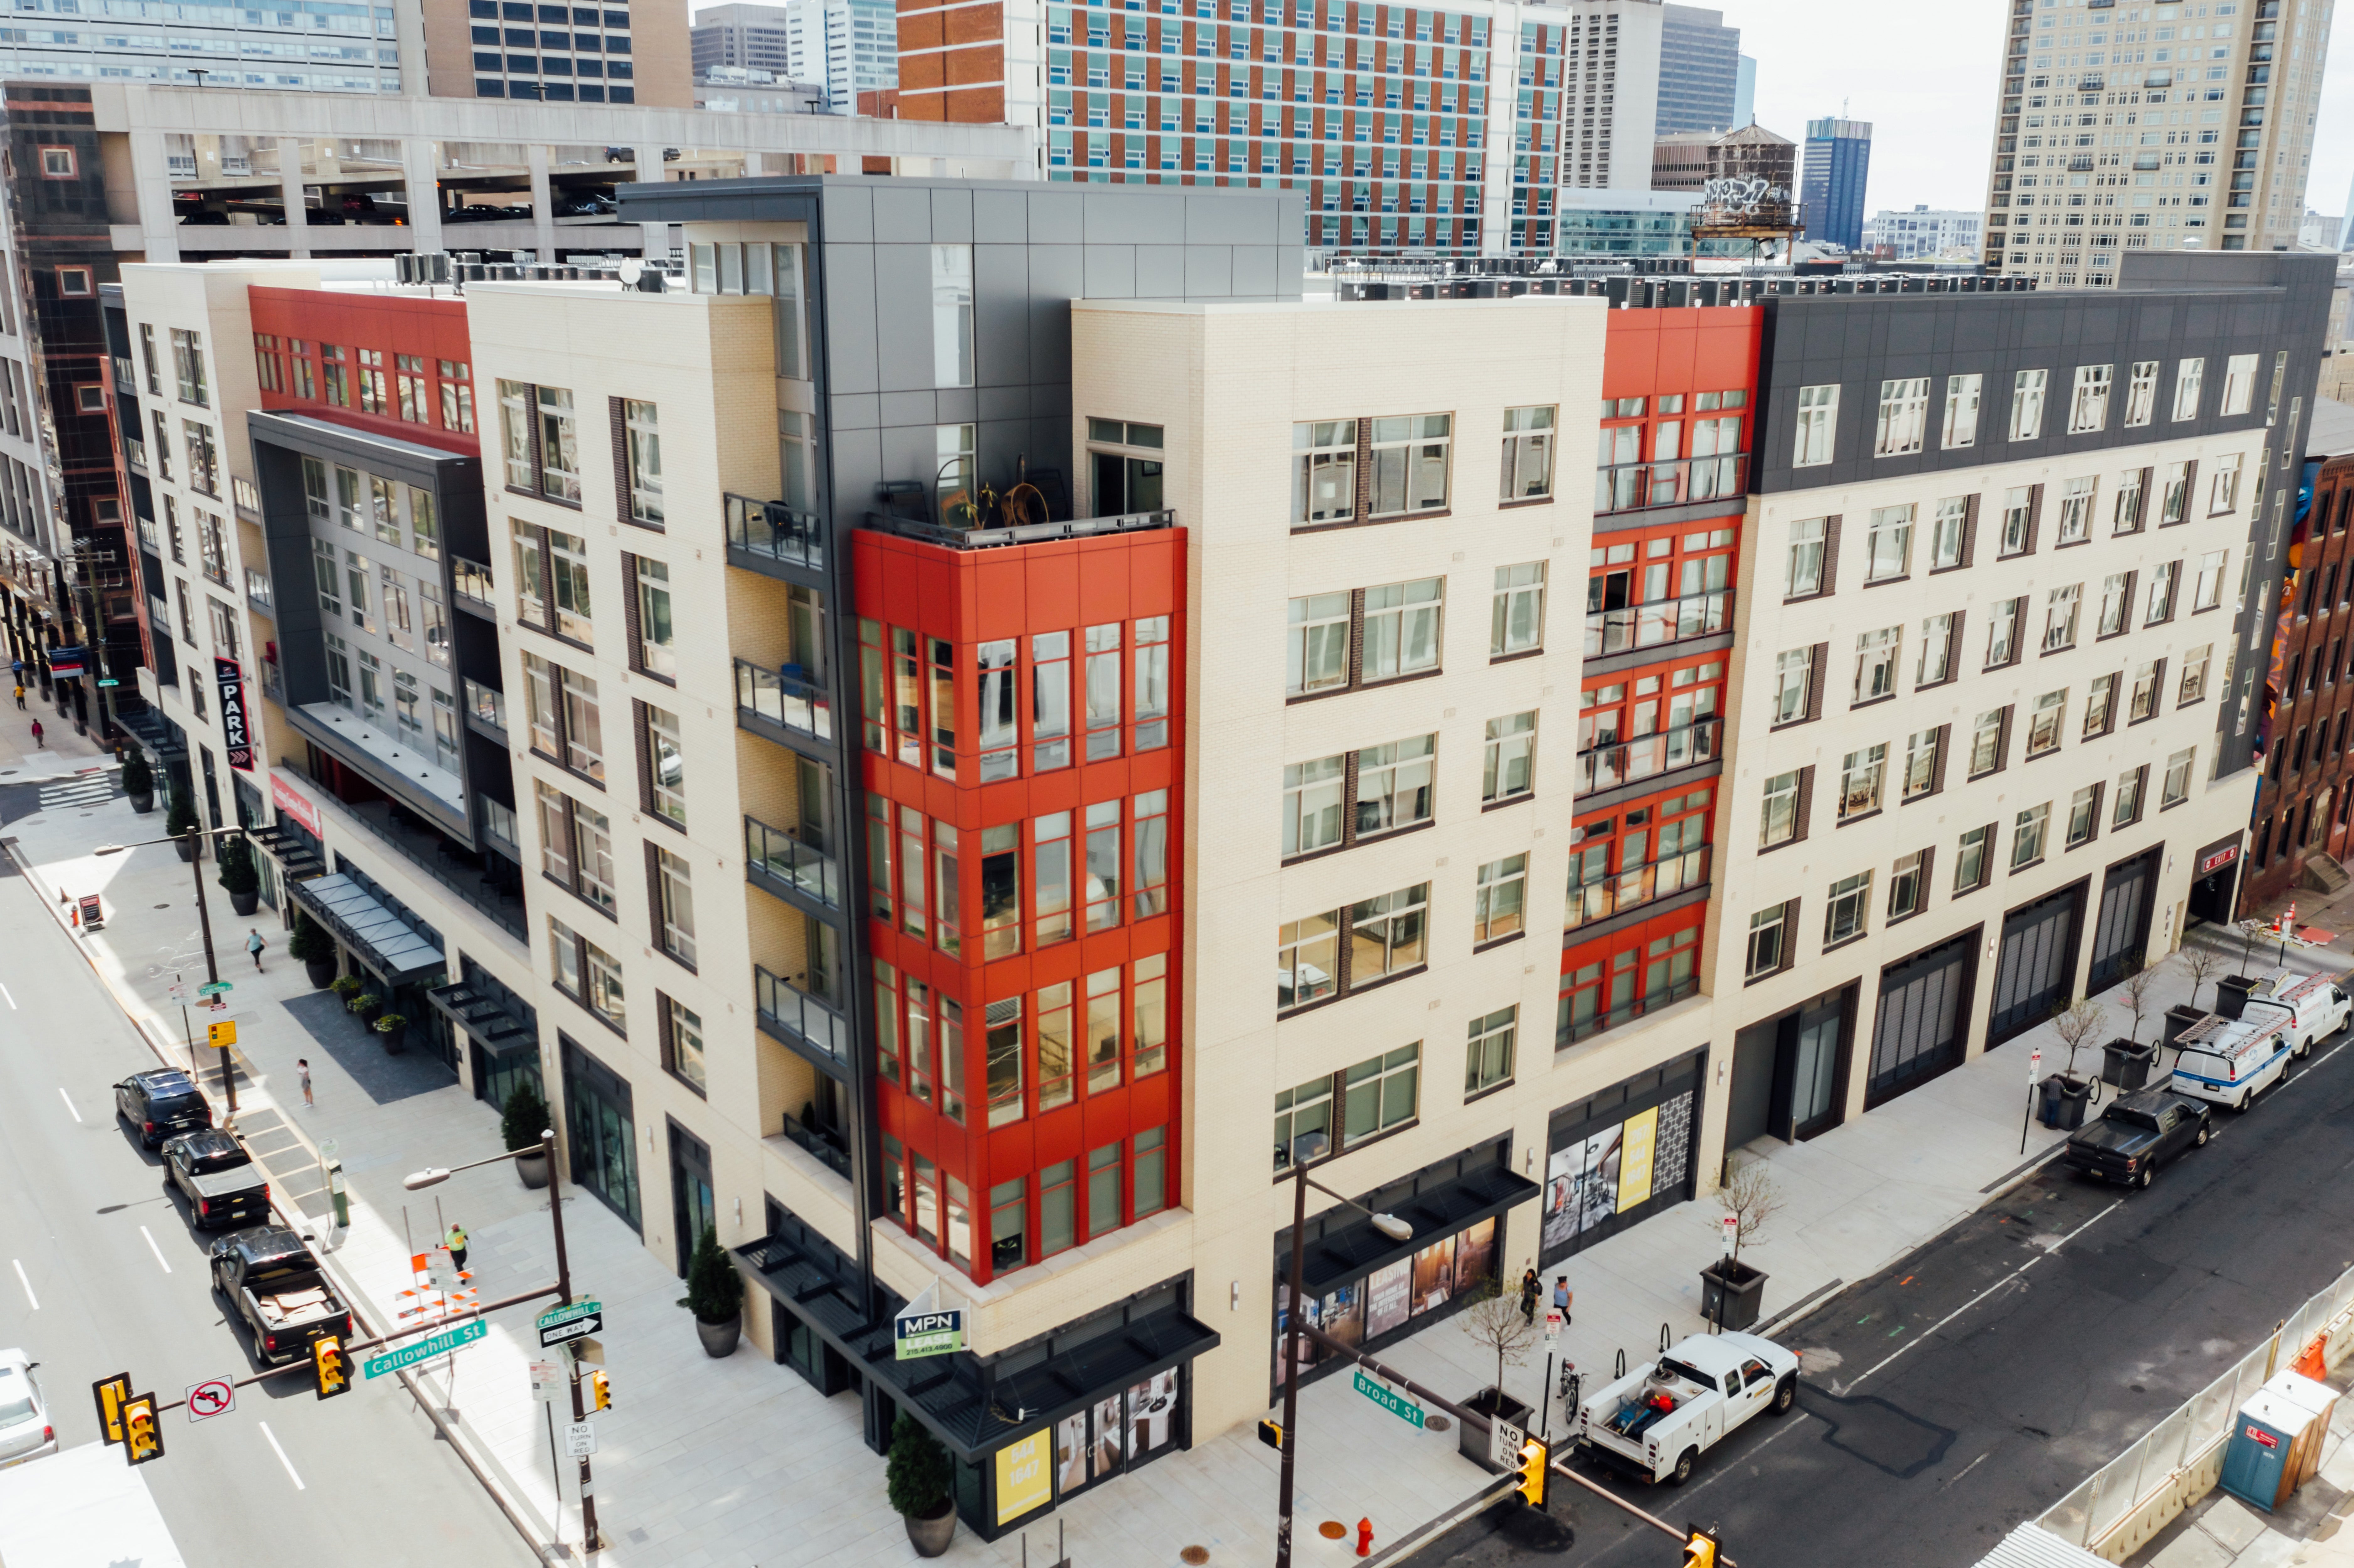 aerial view of the corner of multicolored building